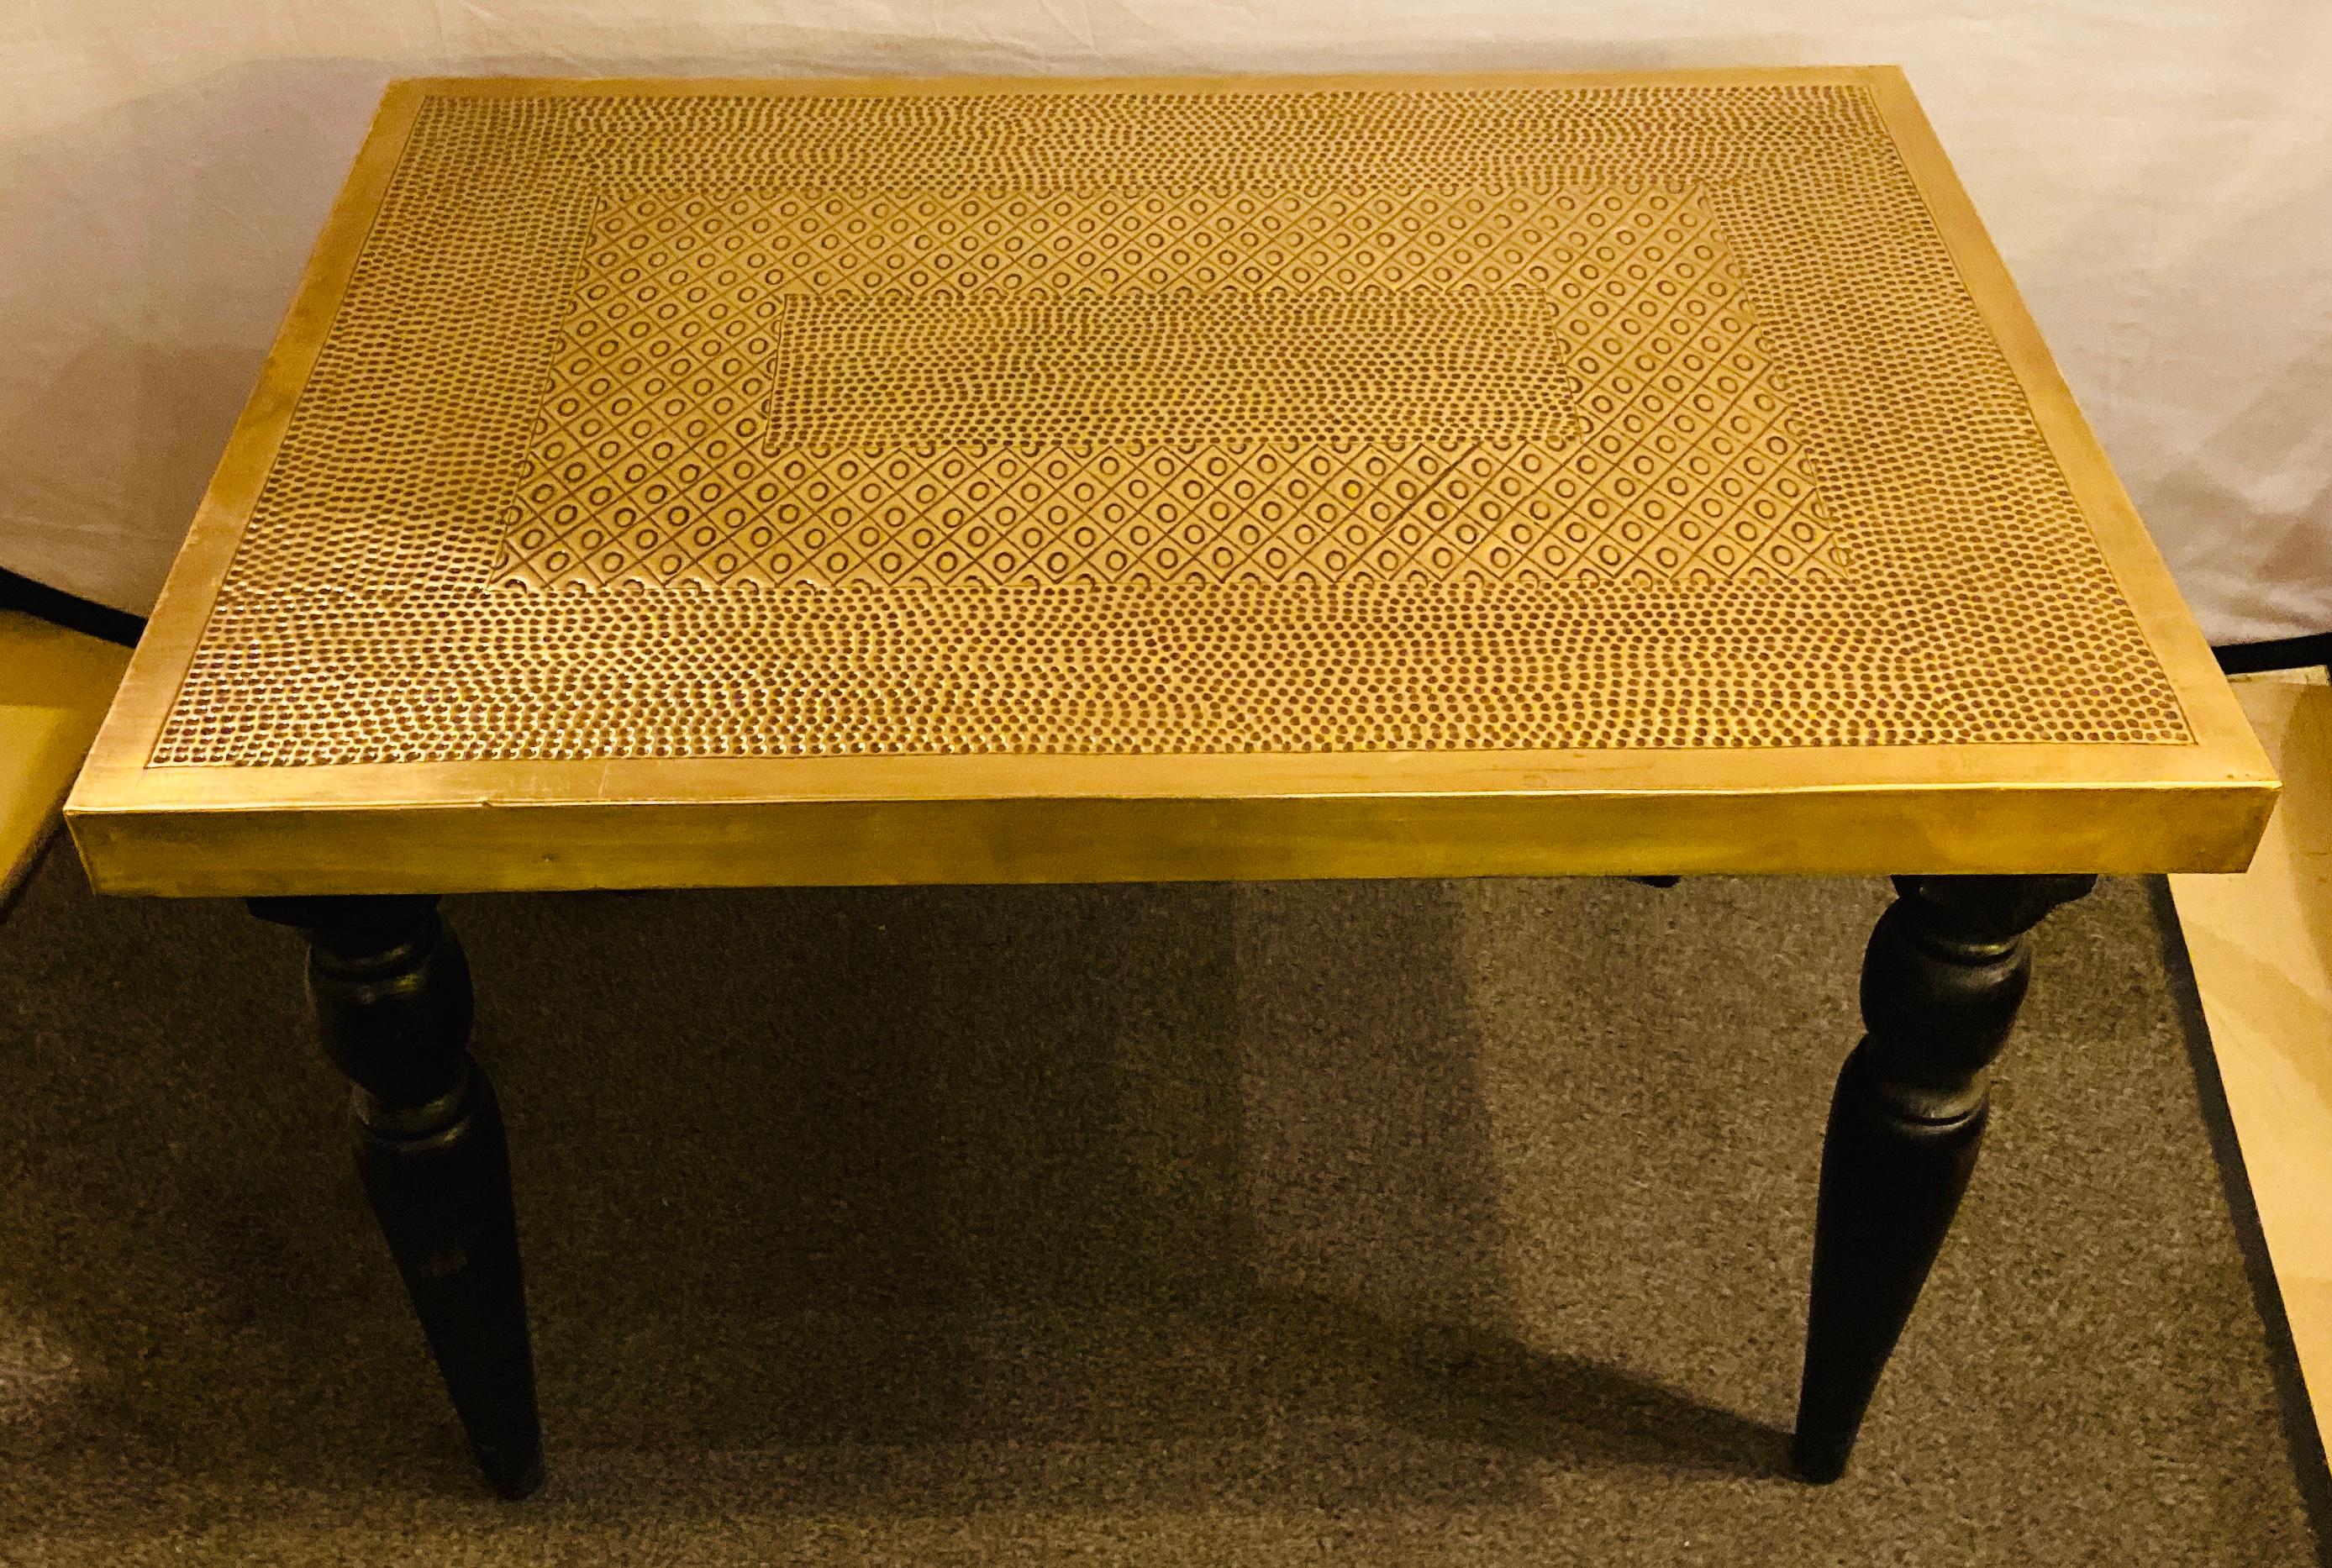 Hollywood Regency Style Handcrafted Brass Center or End Table, a Pair (Unbekannt) im Angebot